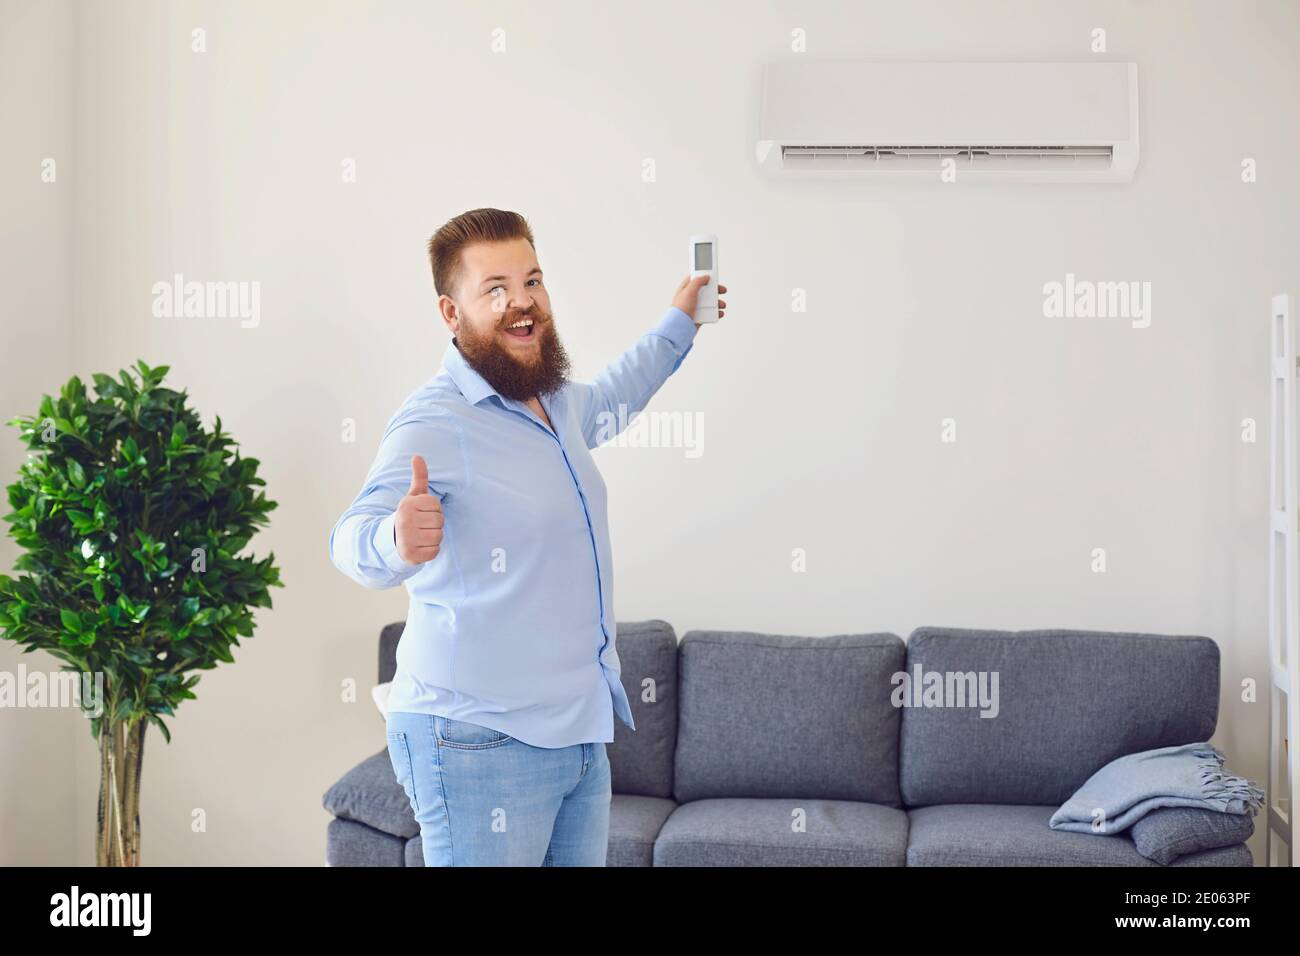 Funny bearded man turning on air conditioner with remote control and showing thumb up in apartment, copy space Stock Photo